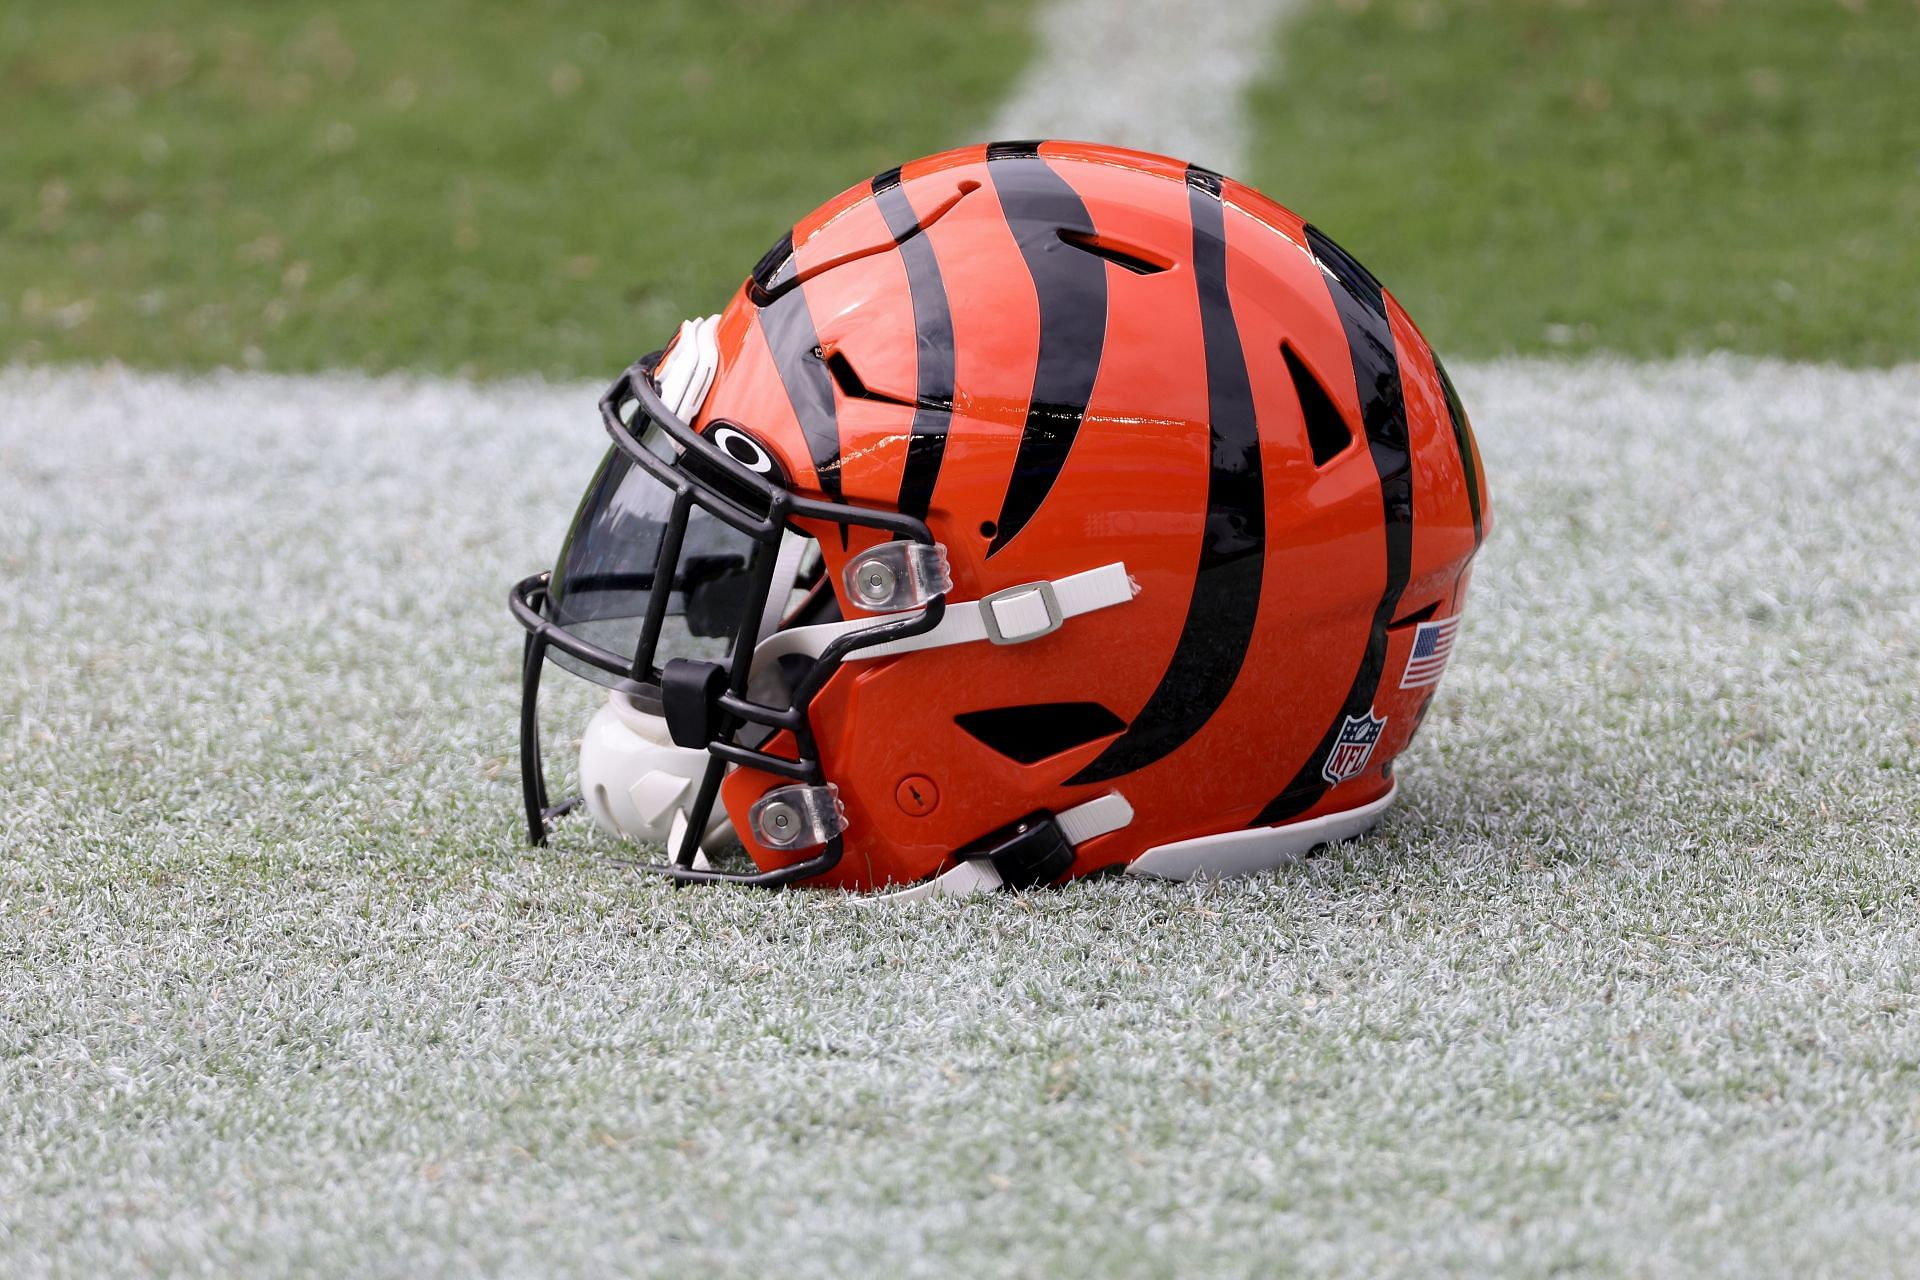 How many times have the Bengals won the Super Bowl? - Sports